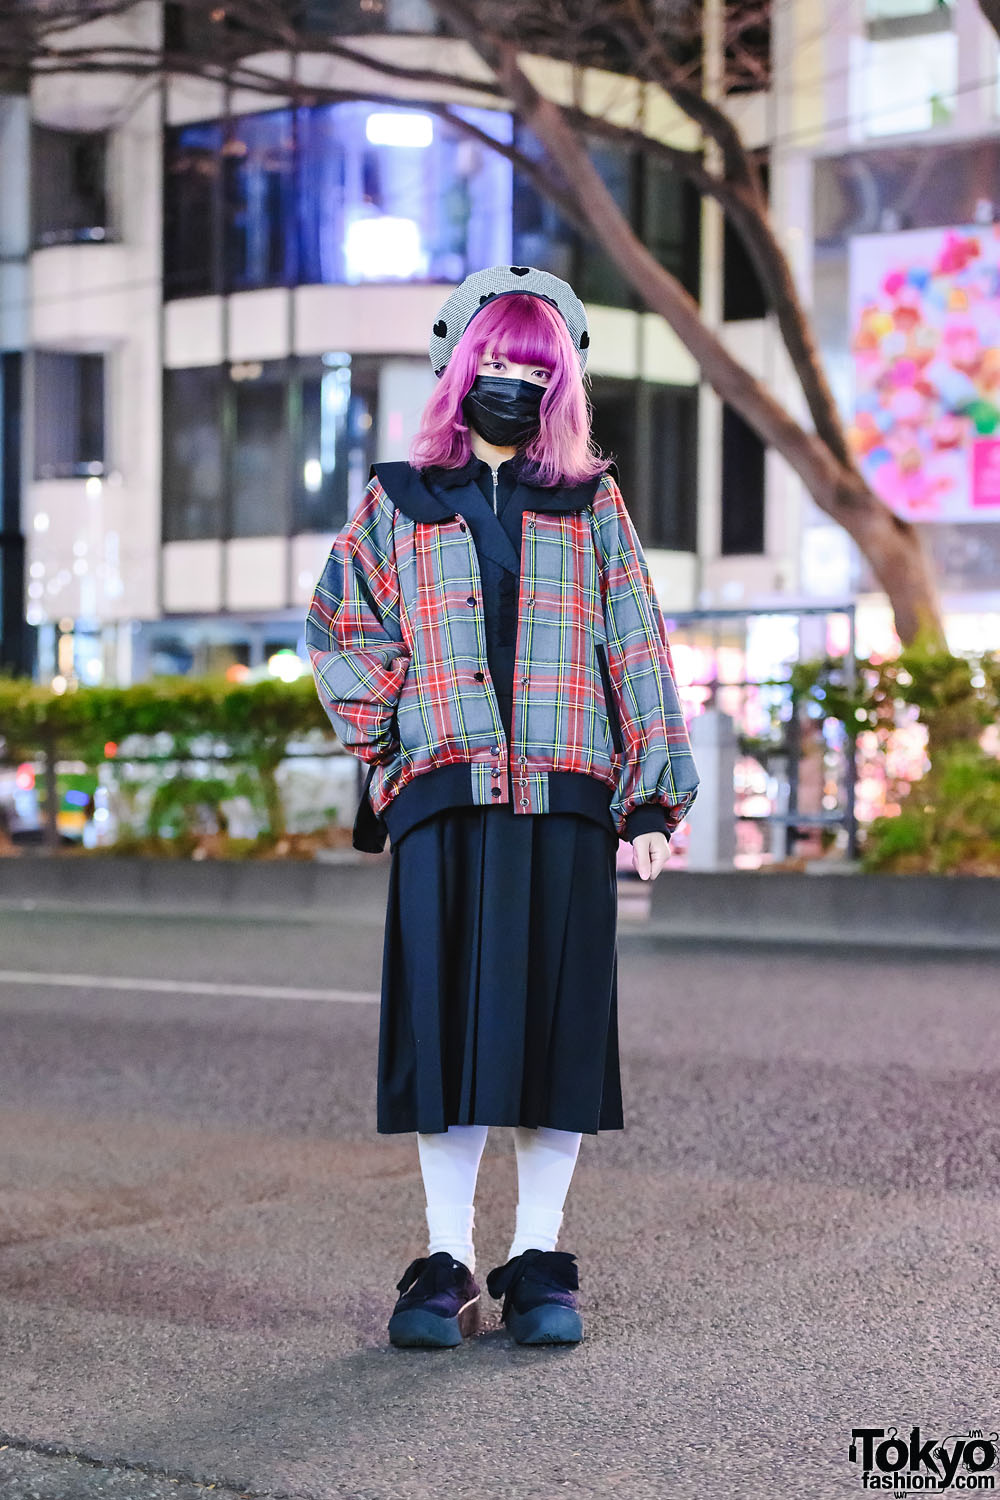 HEIHEI Street Style in Tokyo w/ Pink Hair, Plaid Jacket, Pleated Maxi Dress & Tokyo Bopper Bow Shoes